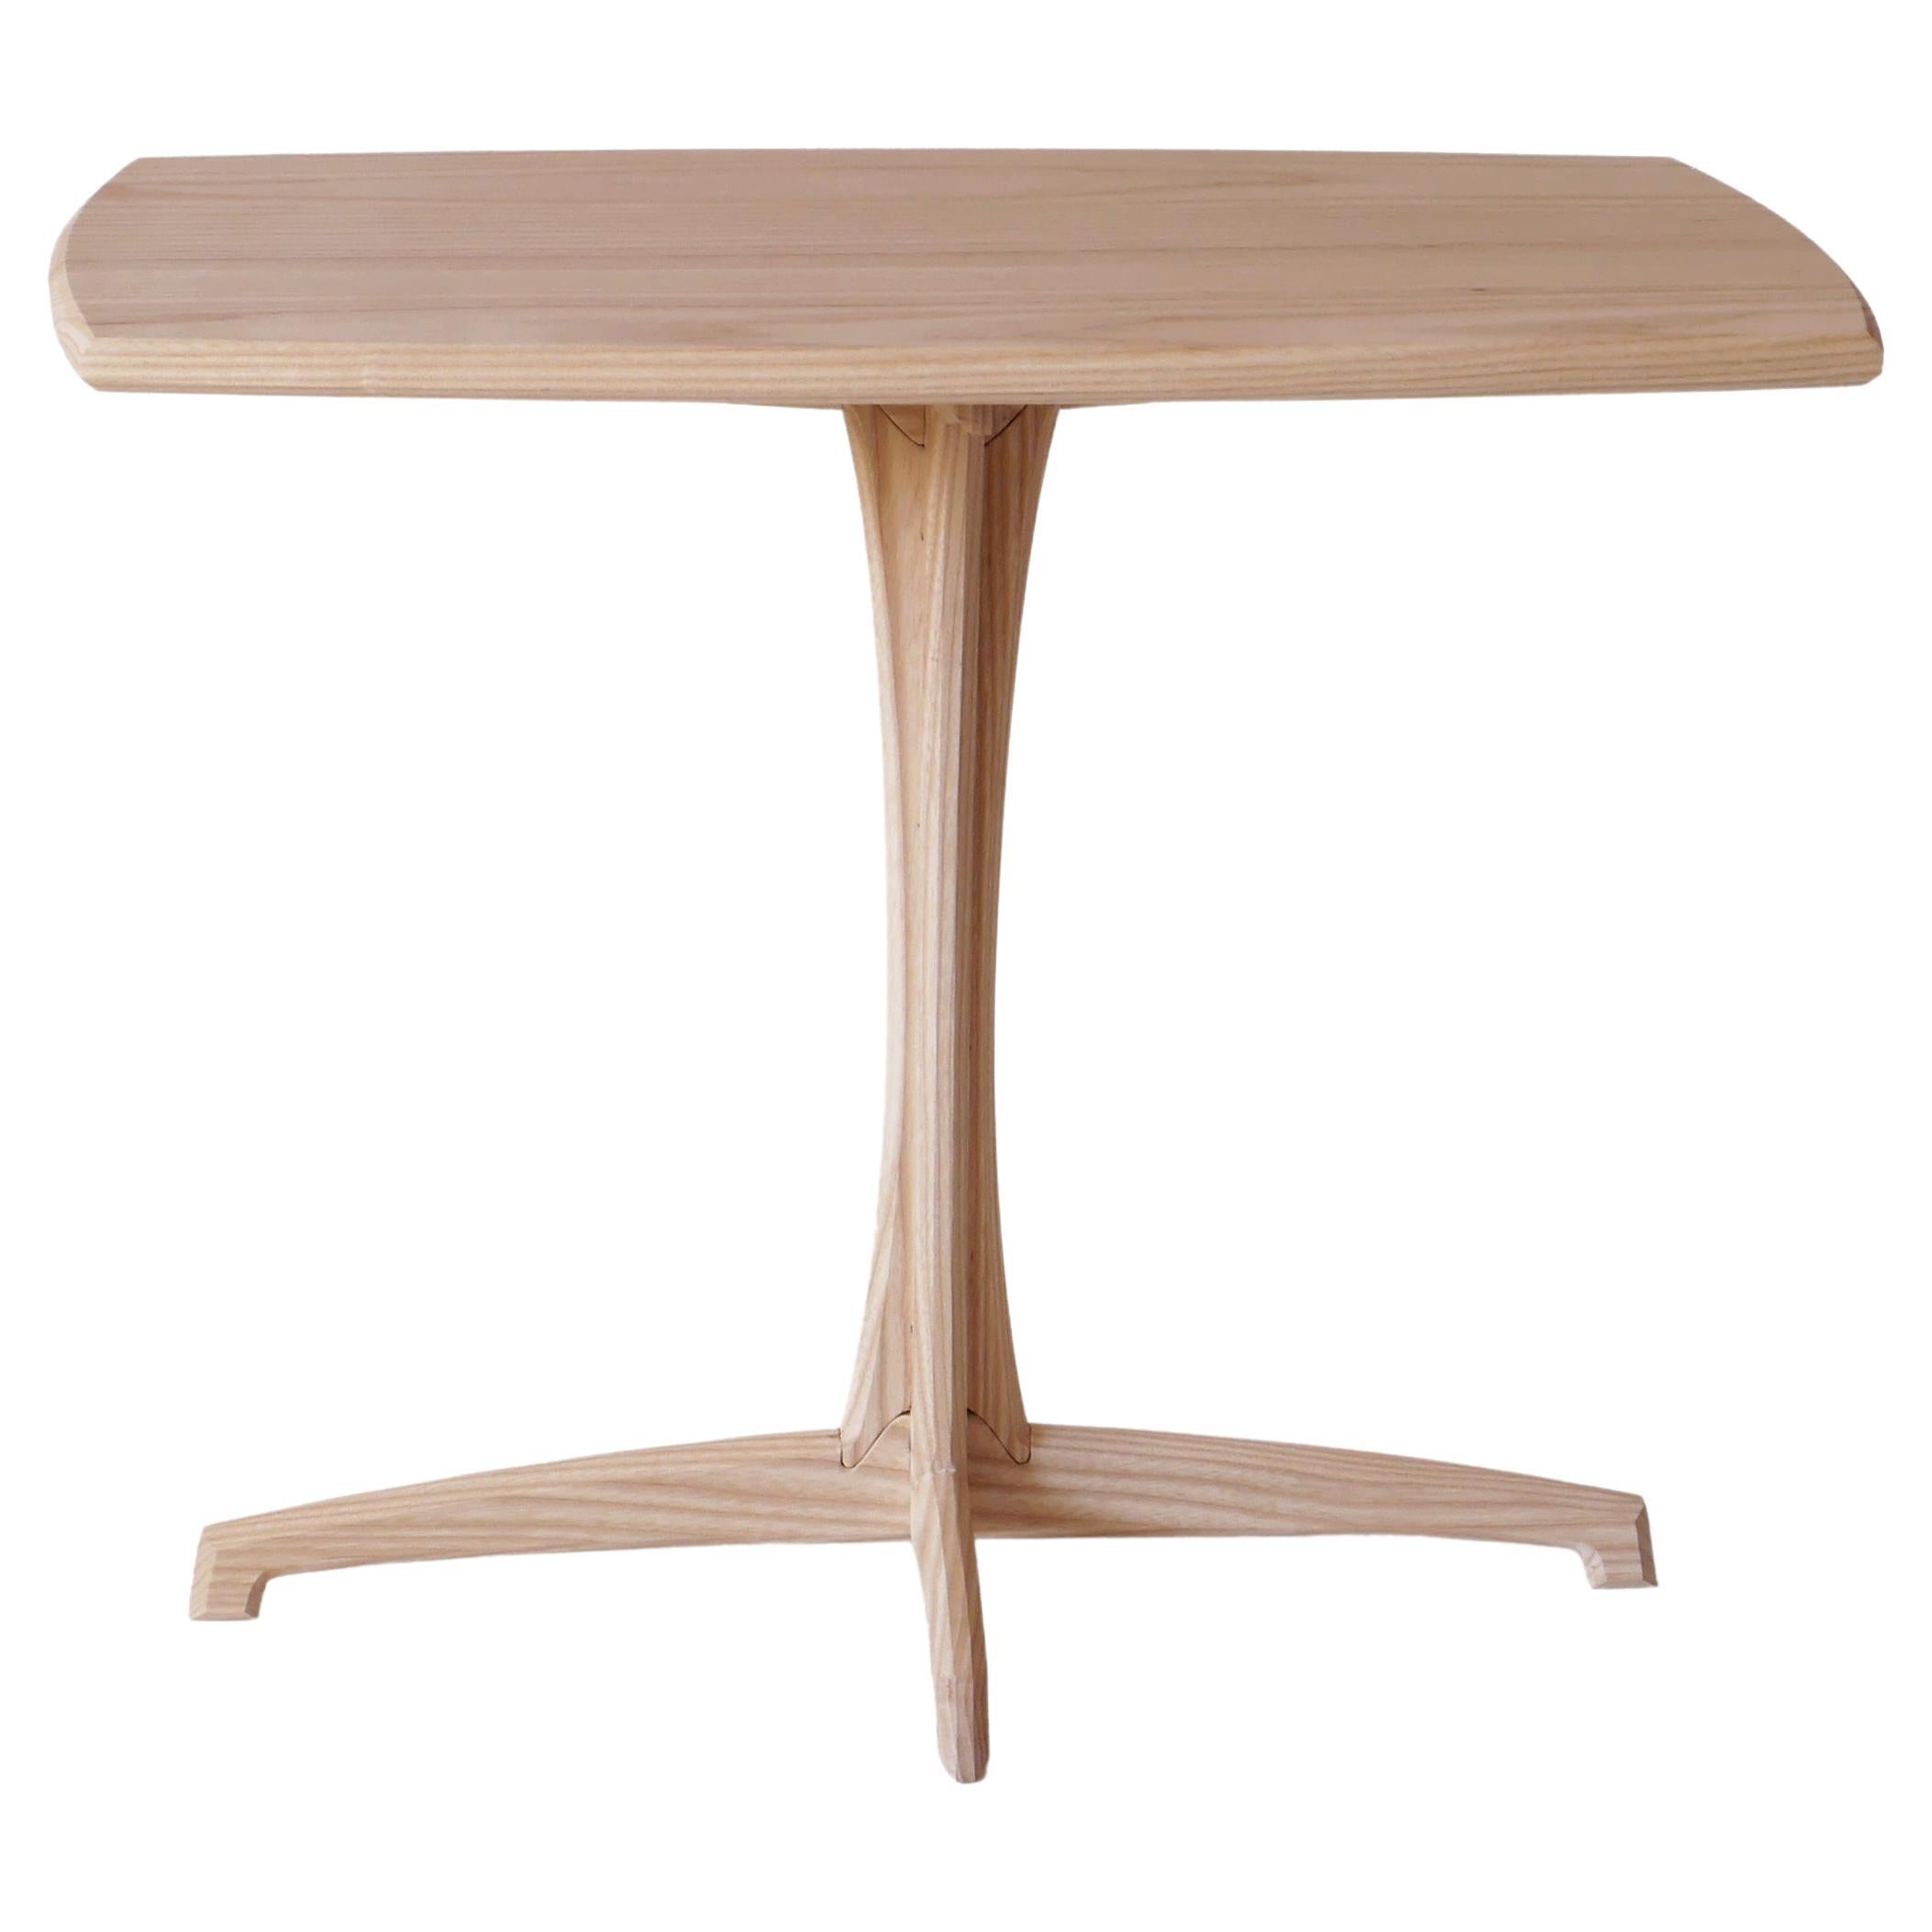 Ash Plume Side Table, Contemporary Handmade Pedestal End Table by Arid For Sale